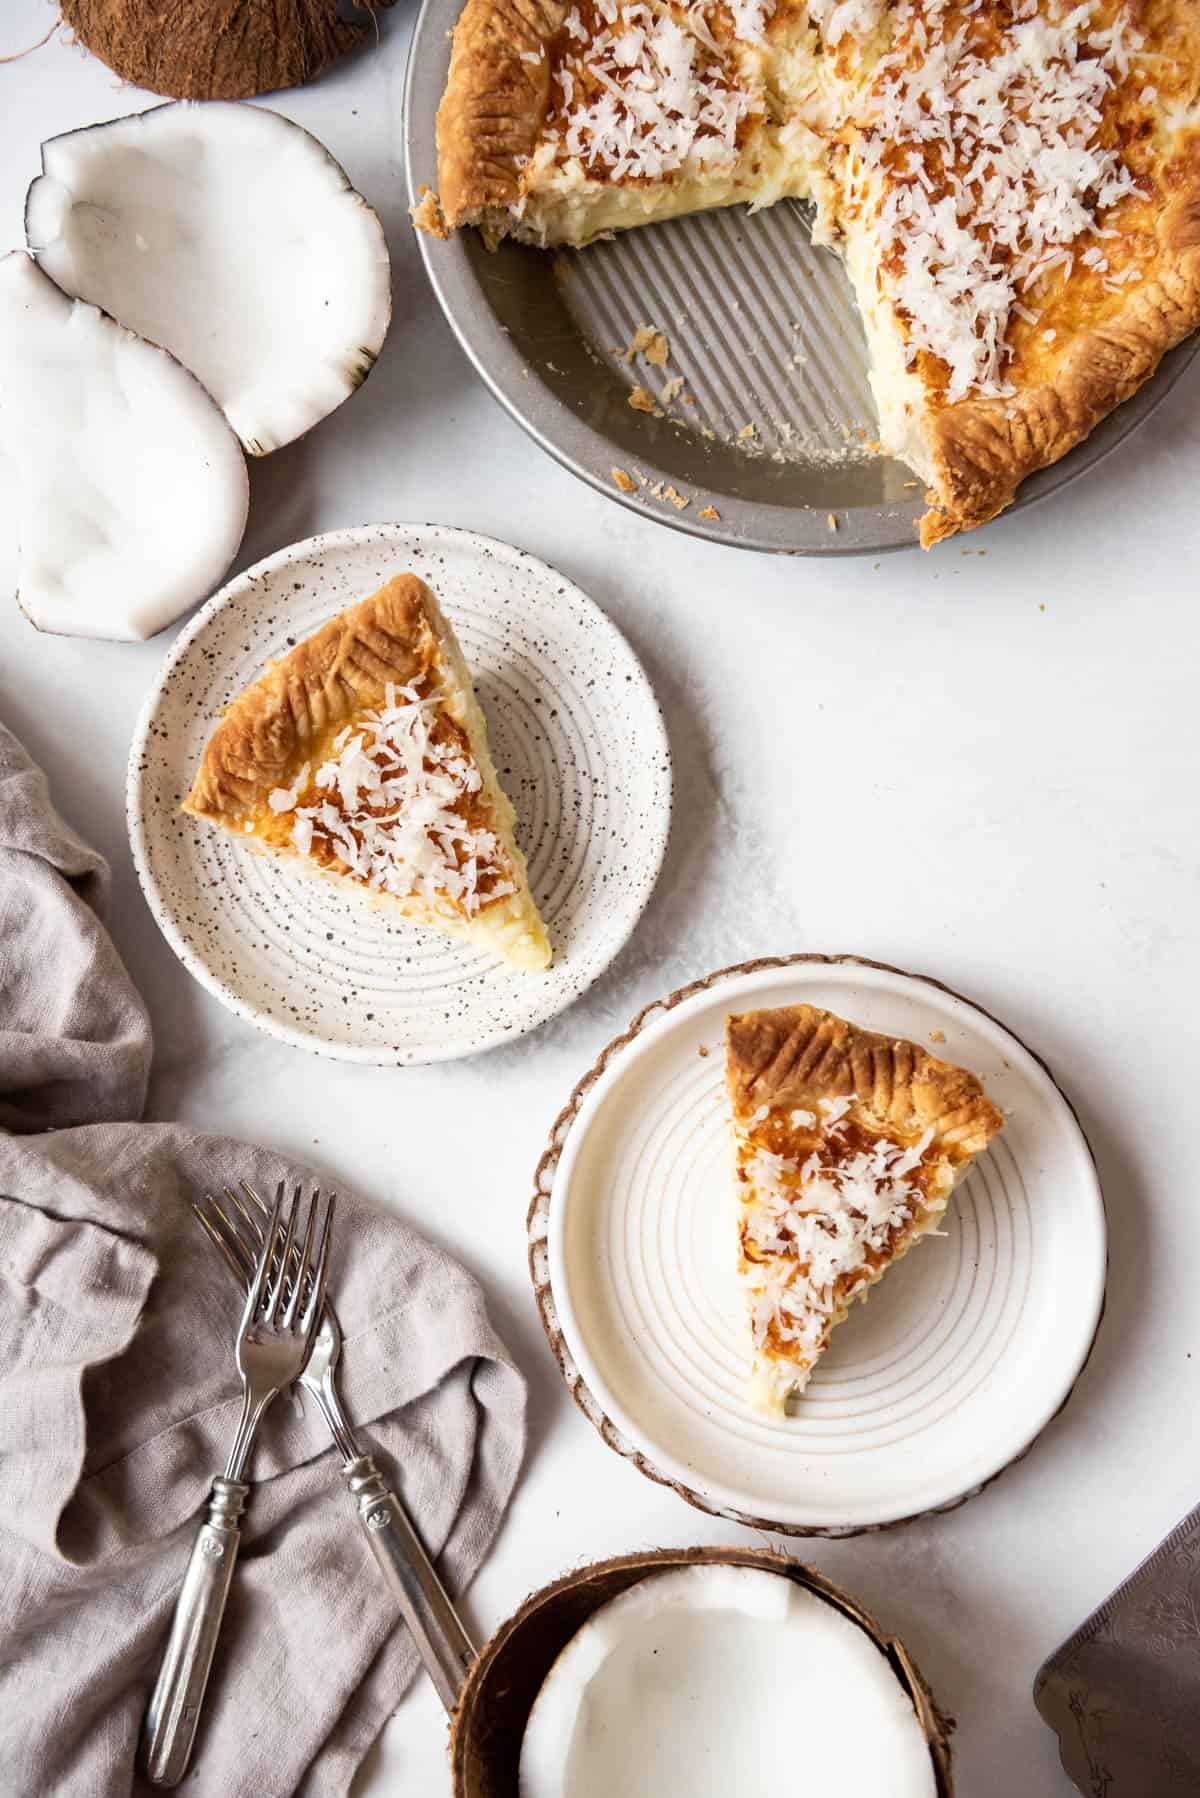 An overhead image of two slices of coconut custard pie on plates next to the rest of the pie, fresh coconut, and a cloth napkin.